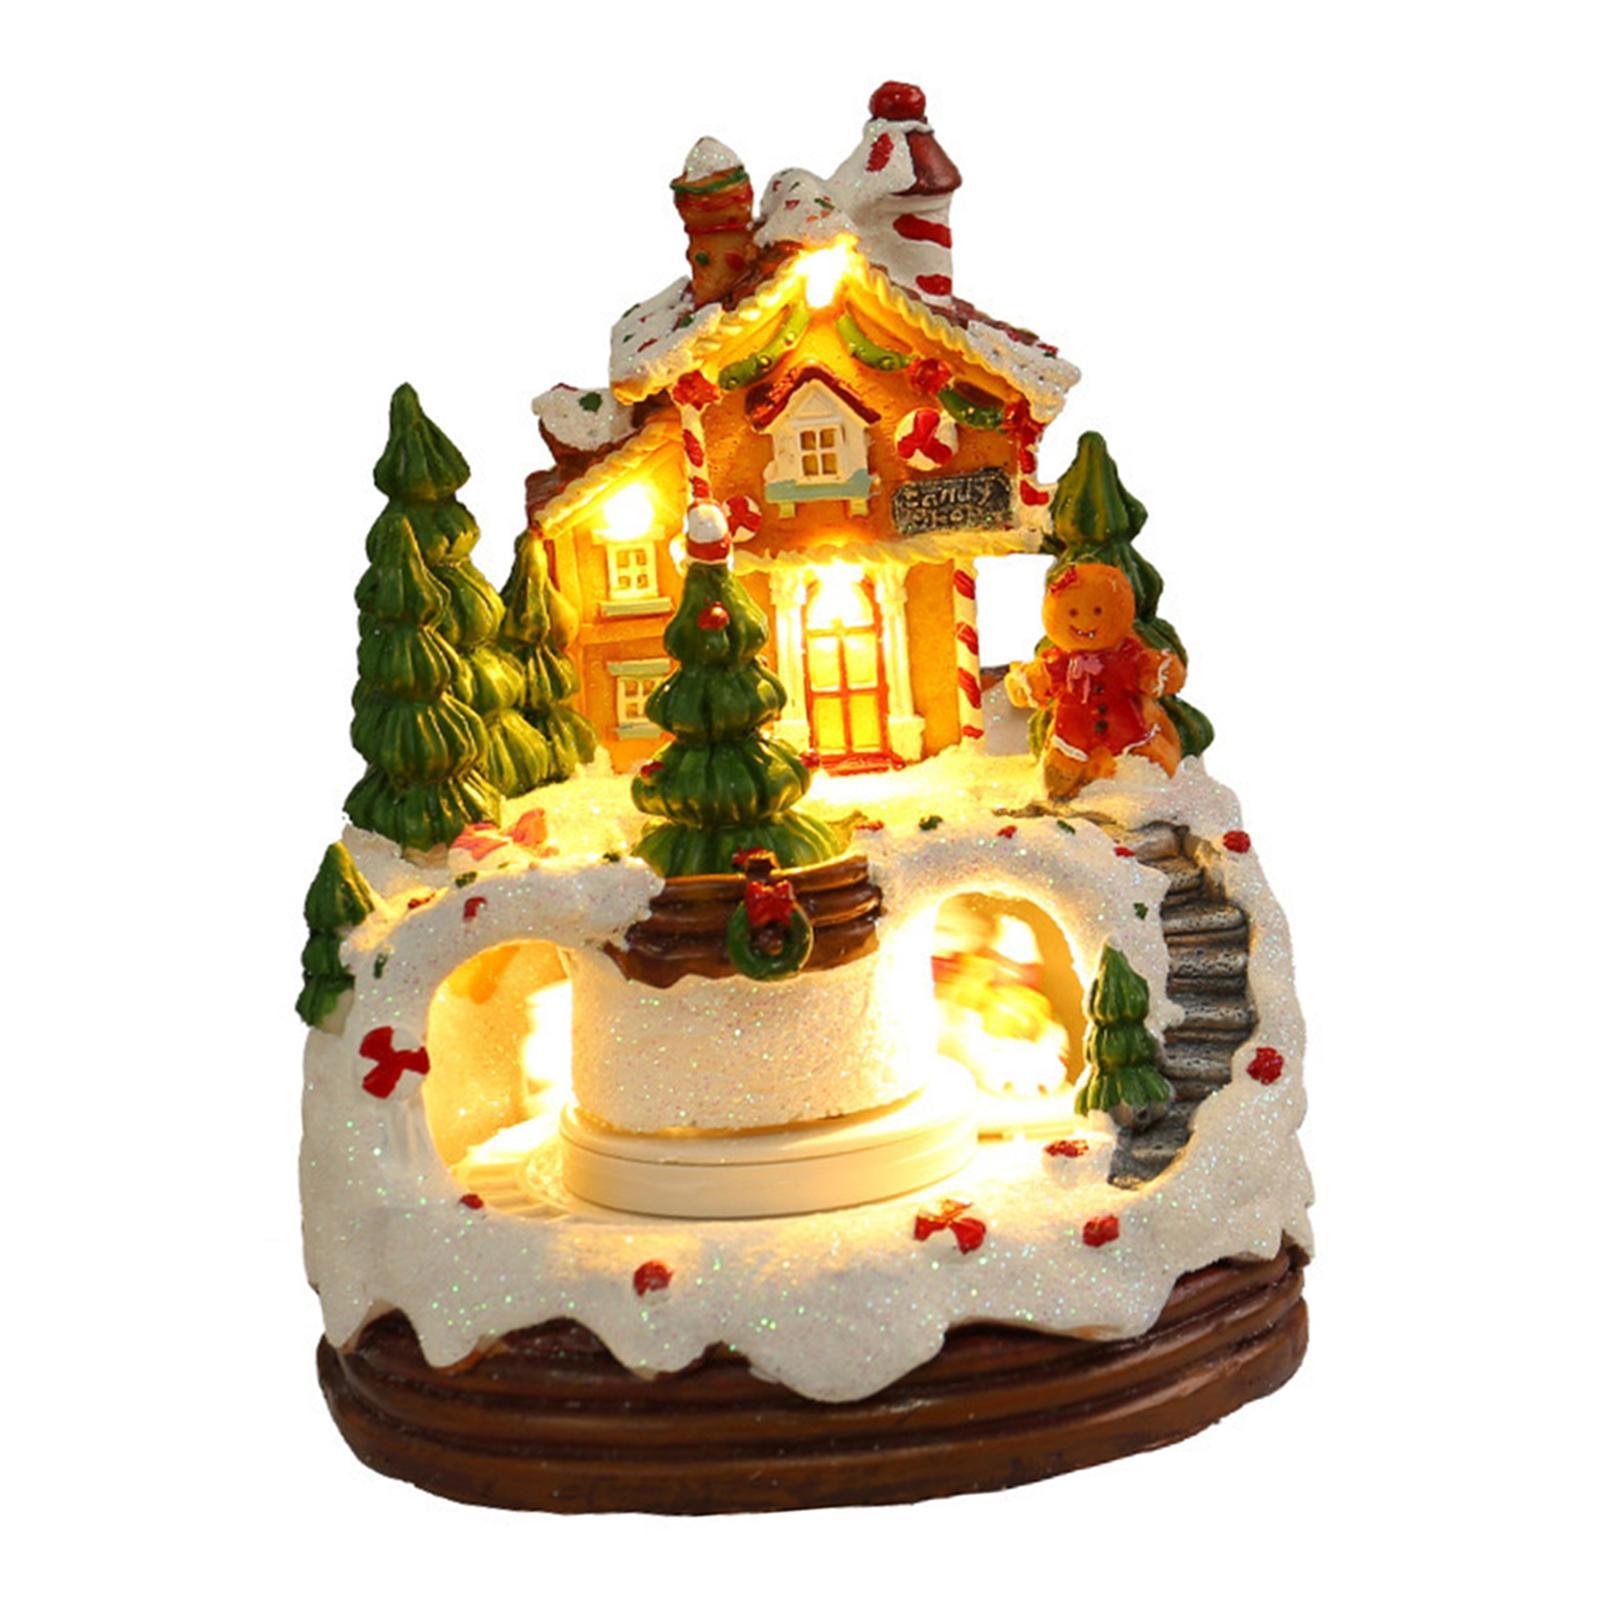 Music Box Christmas Ornaments Ornaments Gifts Building Figurines Christmas Scene for Coffee Table Indoor Housewarming Holiday